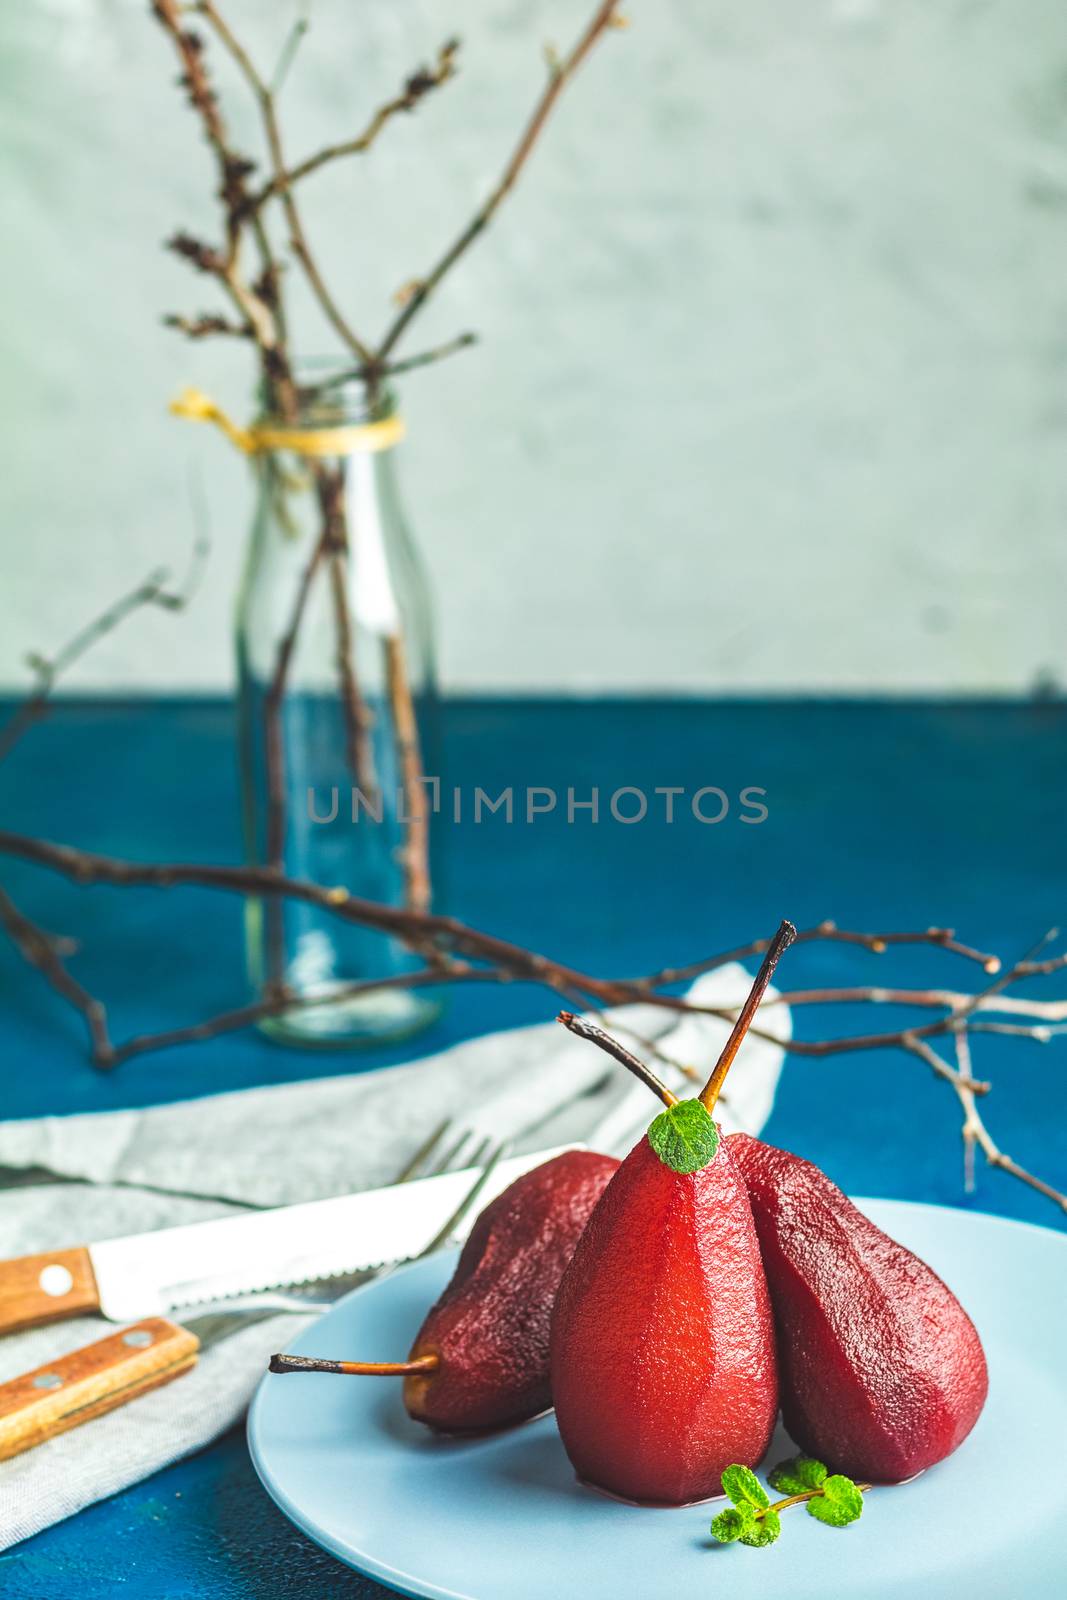 Pears in wine. Traditional dessert pears stewed in red wine with chocolate sauce on plate on blue concrete surface. Concept for romantic dinner dessert. Simple Paleo style dessert pear